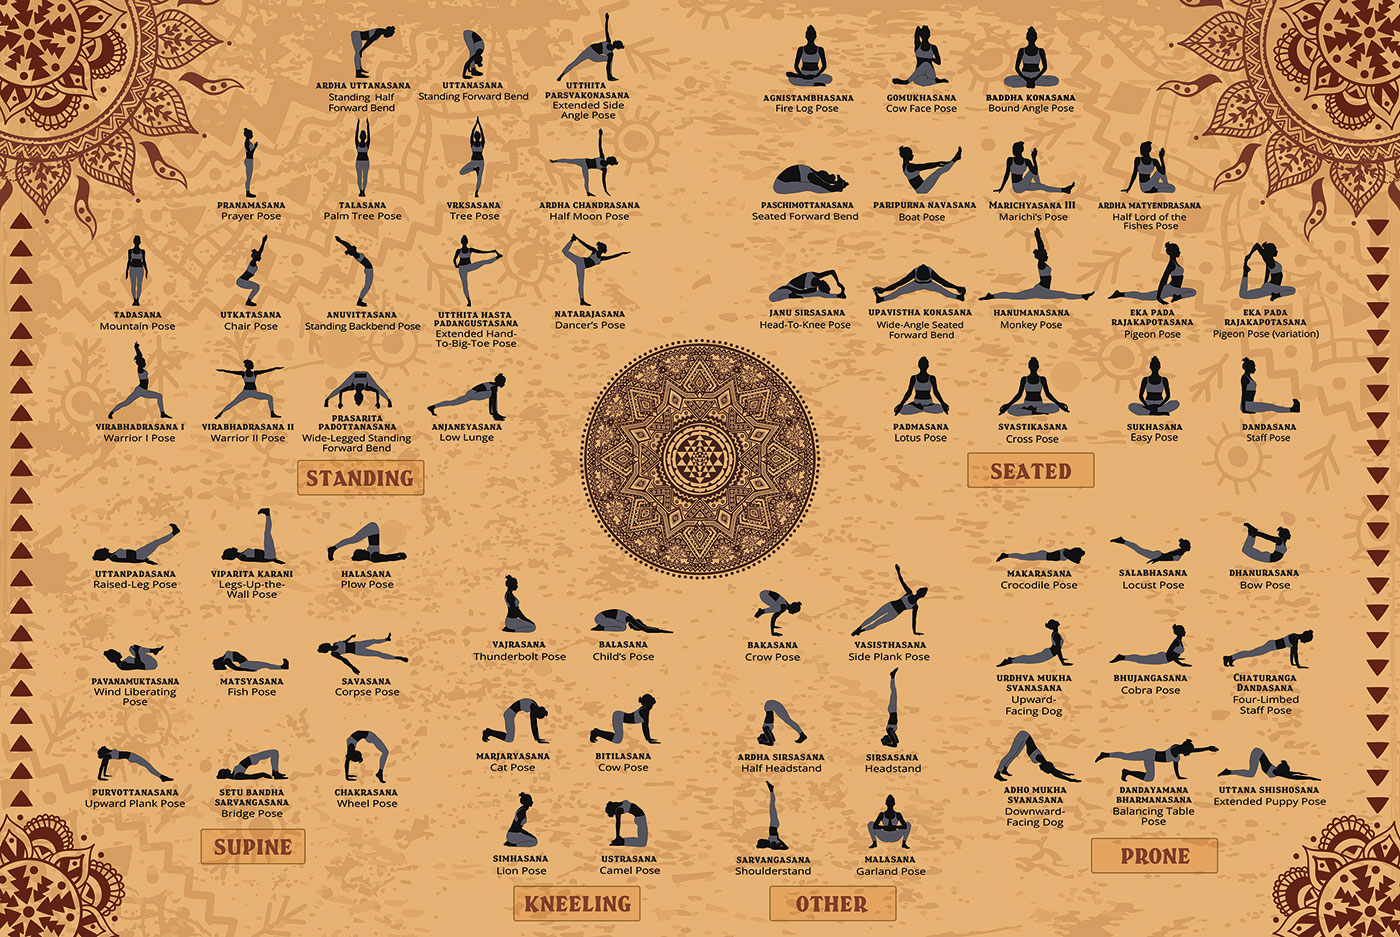 What Is Hatha Yoga? Meaning, History & Practice Explained